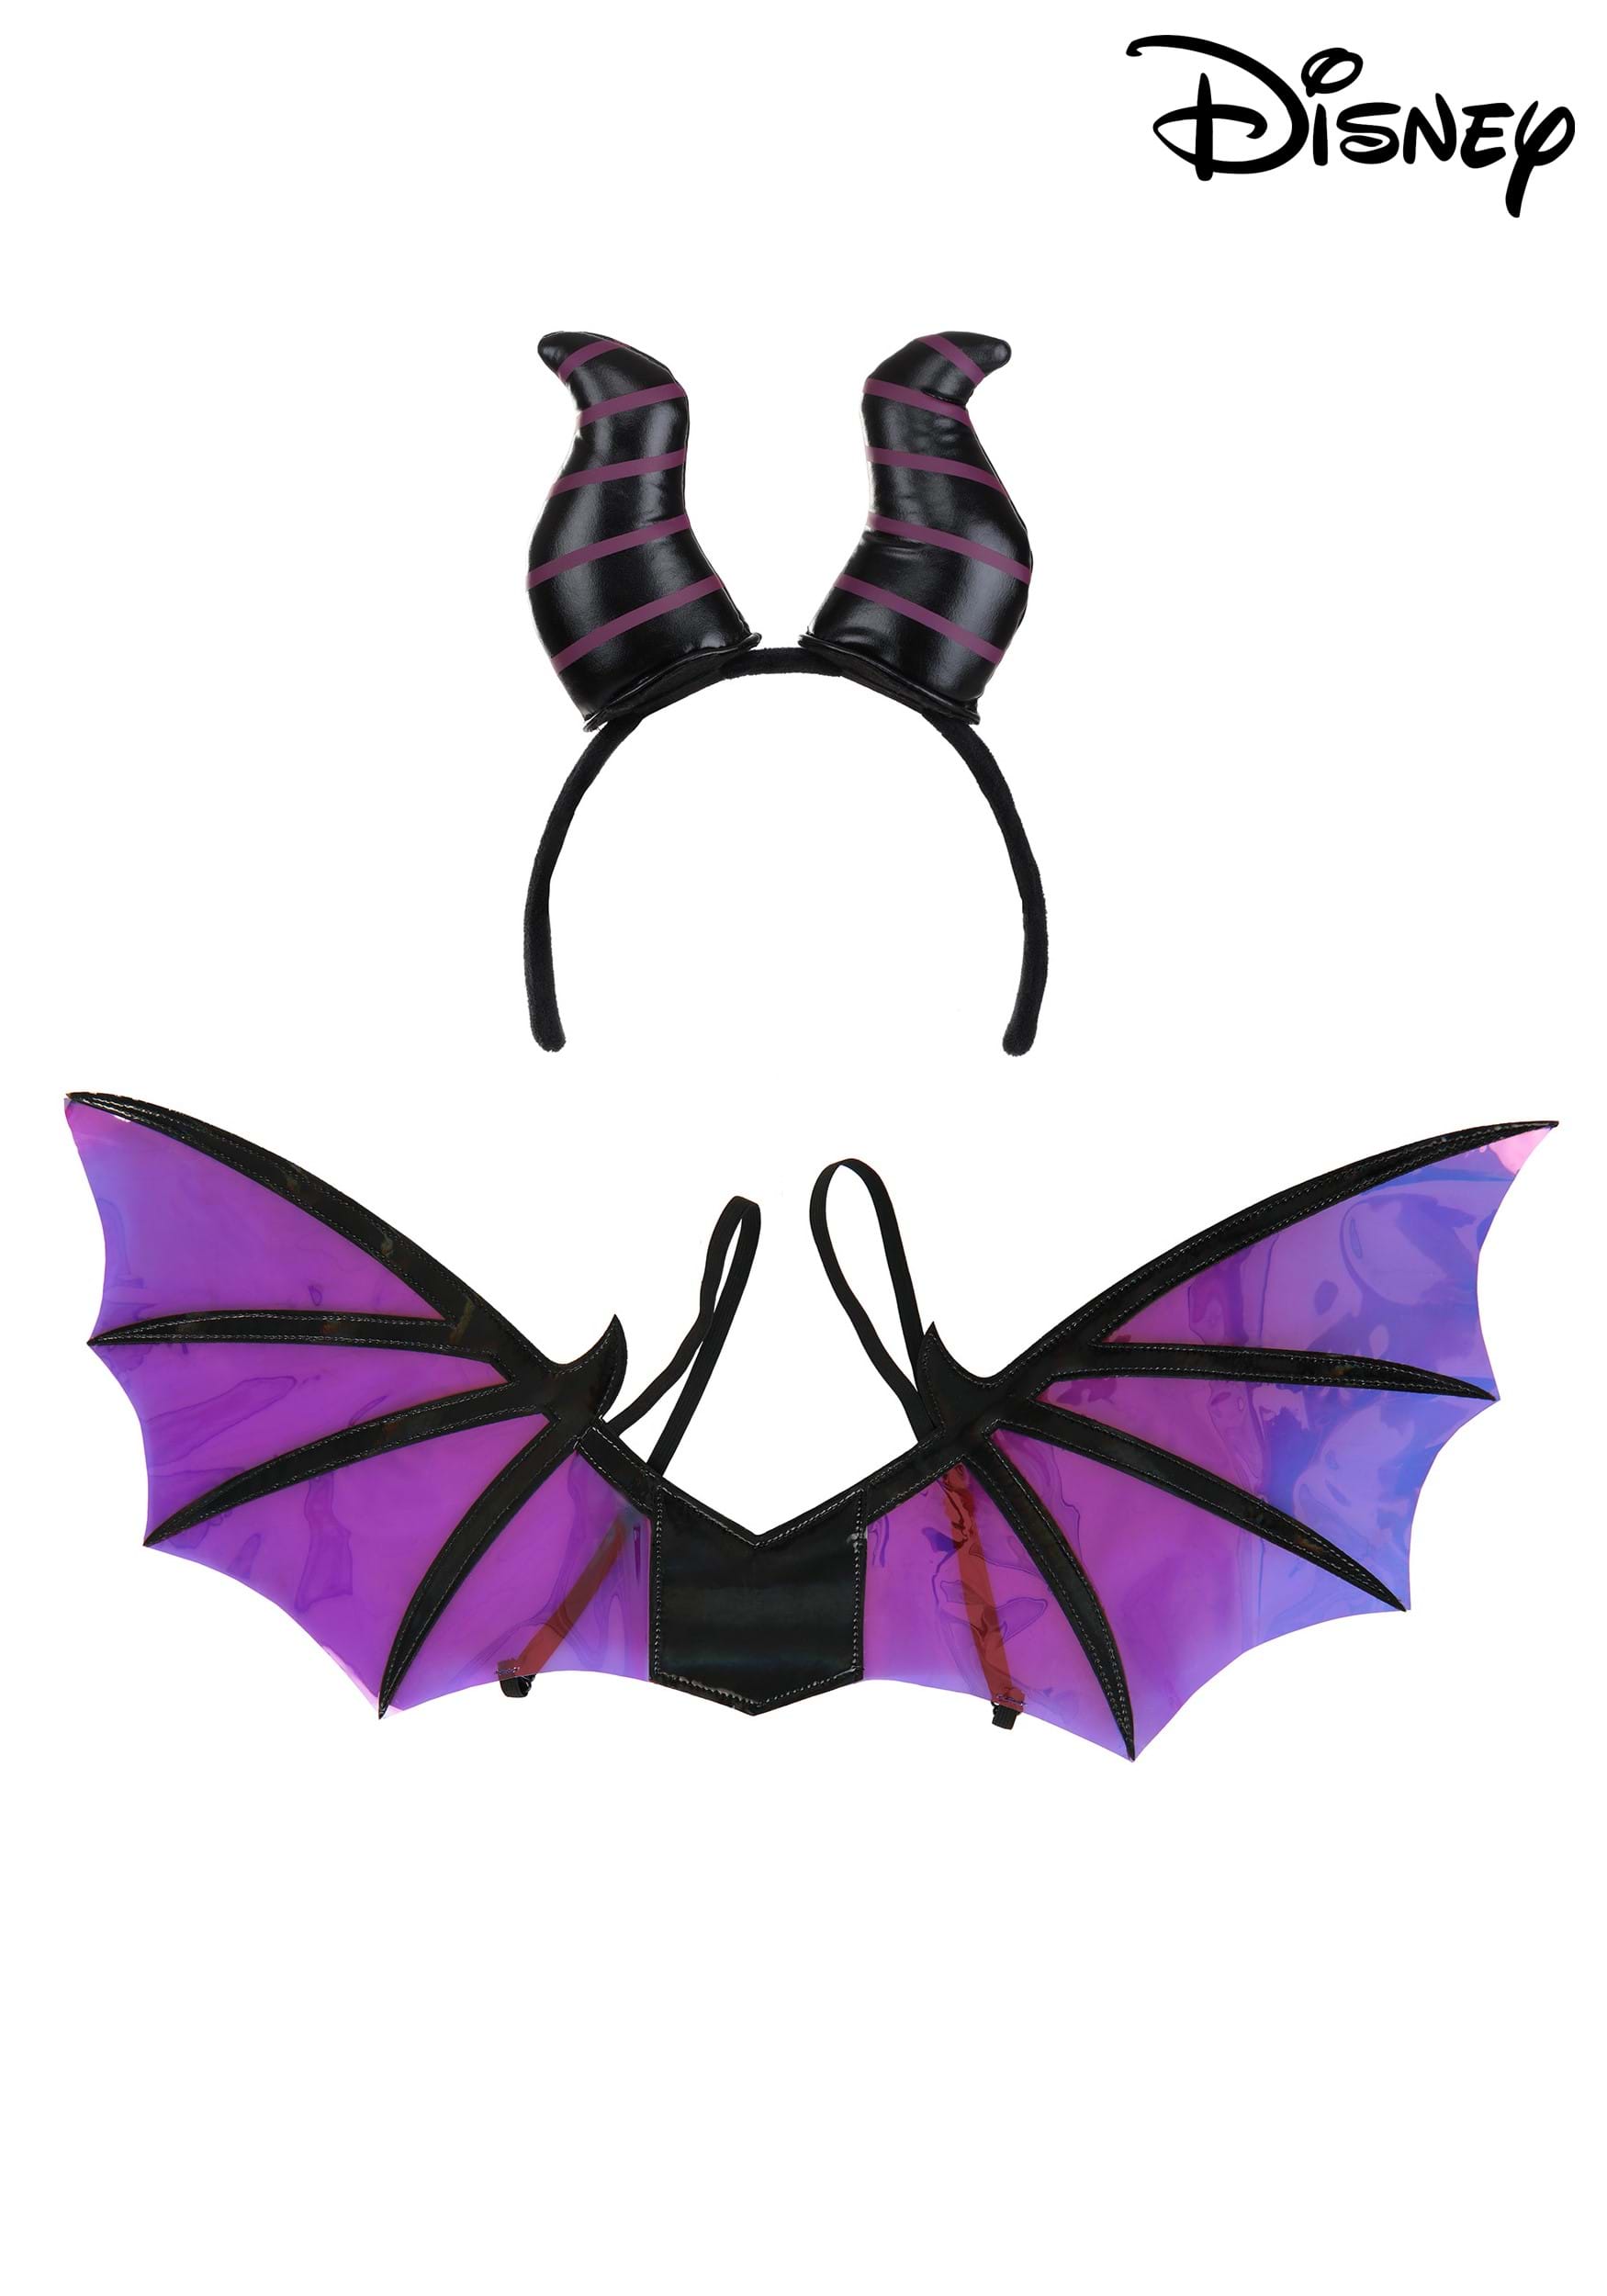 Maleficent Dragon Horns Headband And Wings Kit